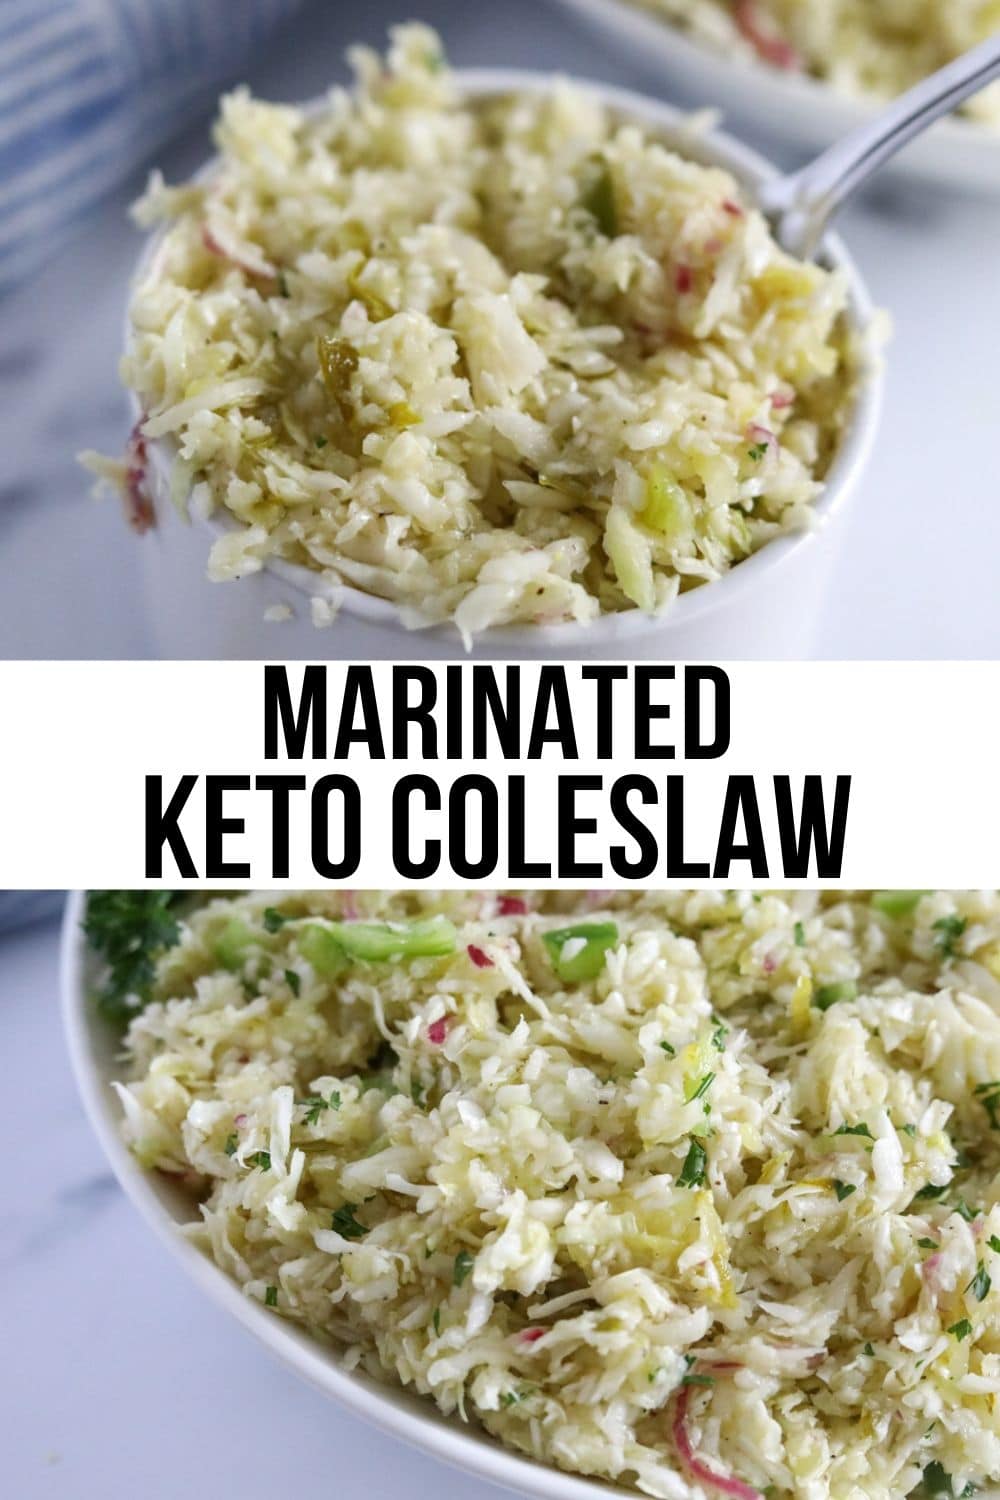 keto coleslaw recipe with freshly chopped herbs in a white bowl